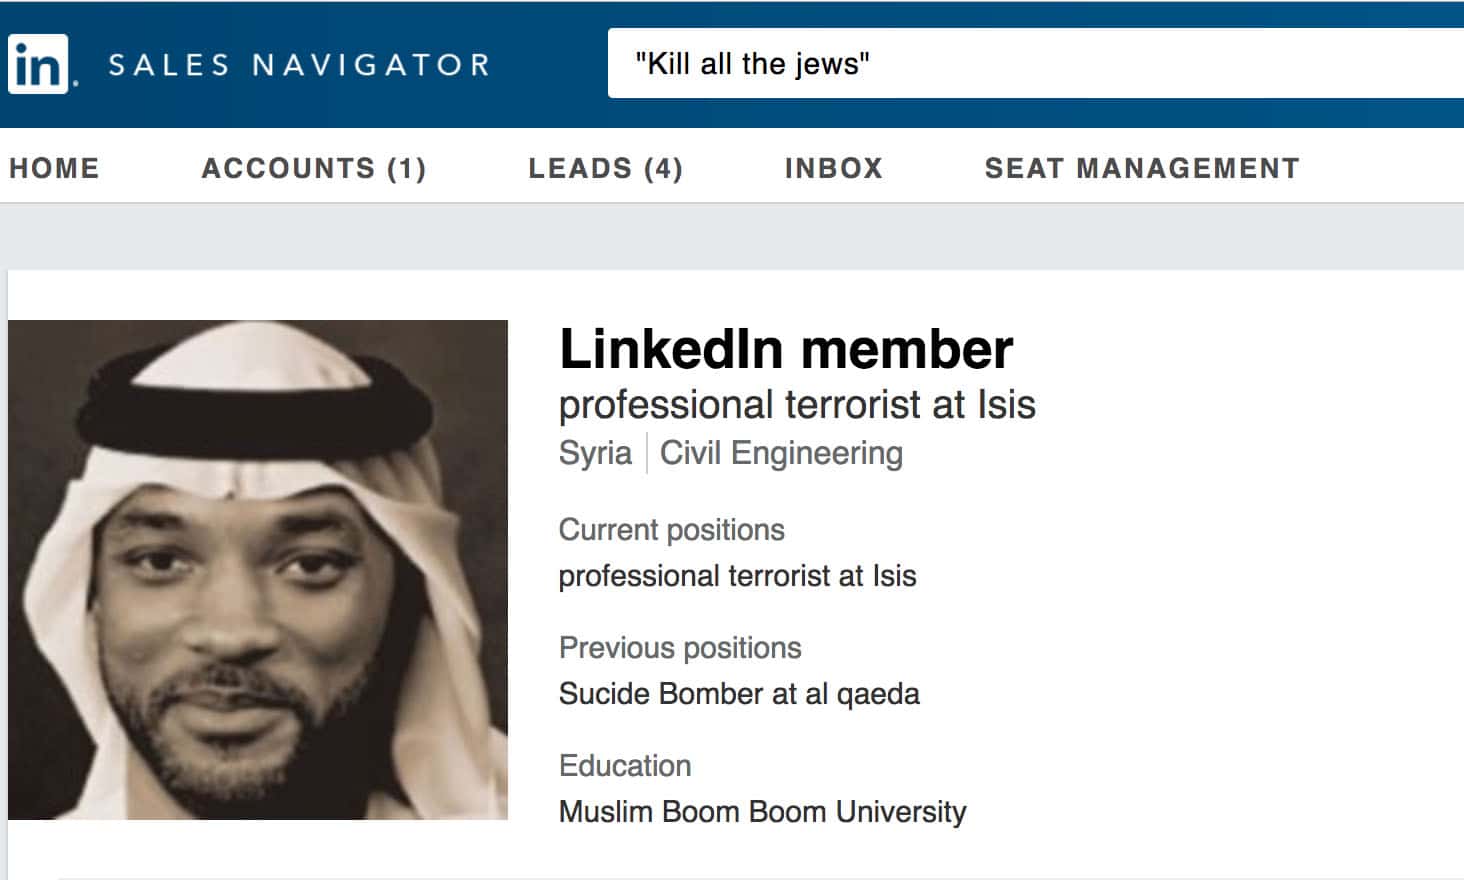 Will Smith's face pasted on a fake LinkedIn Profile introduces, LinkedIn Targeting Dirt: Haters, Terrorists, Slanted Judges, Intel Ops, Foreign Nuclear Engineers & MORE!